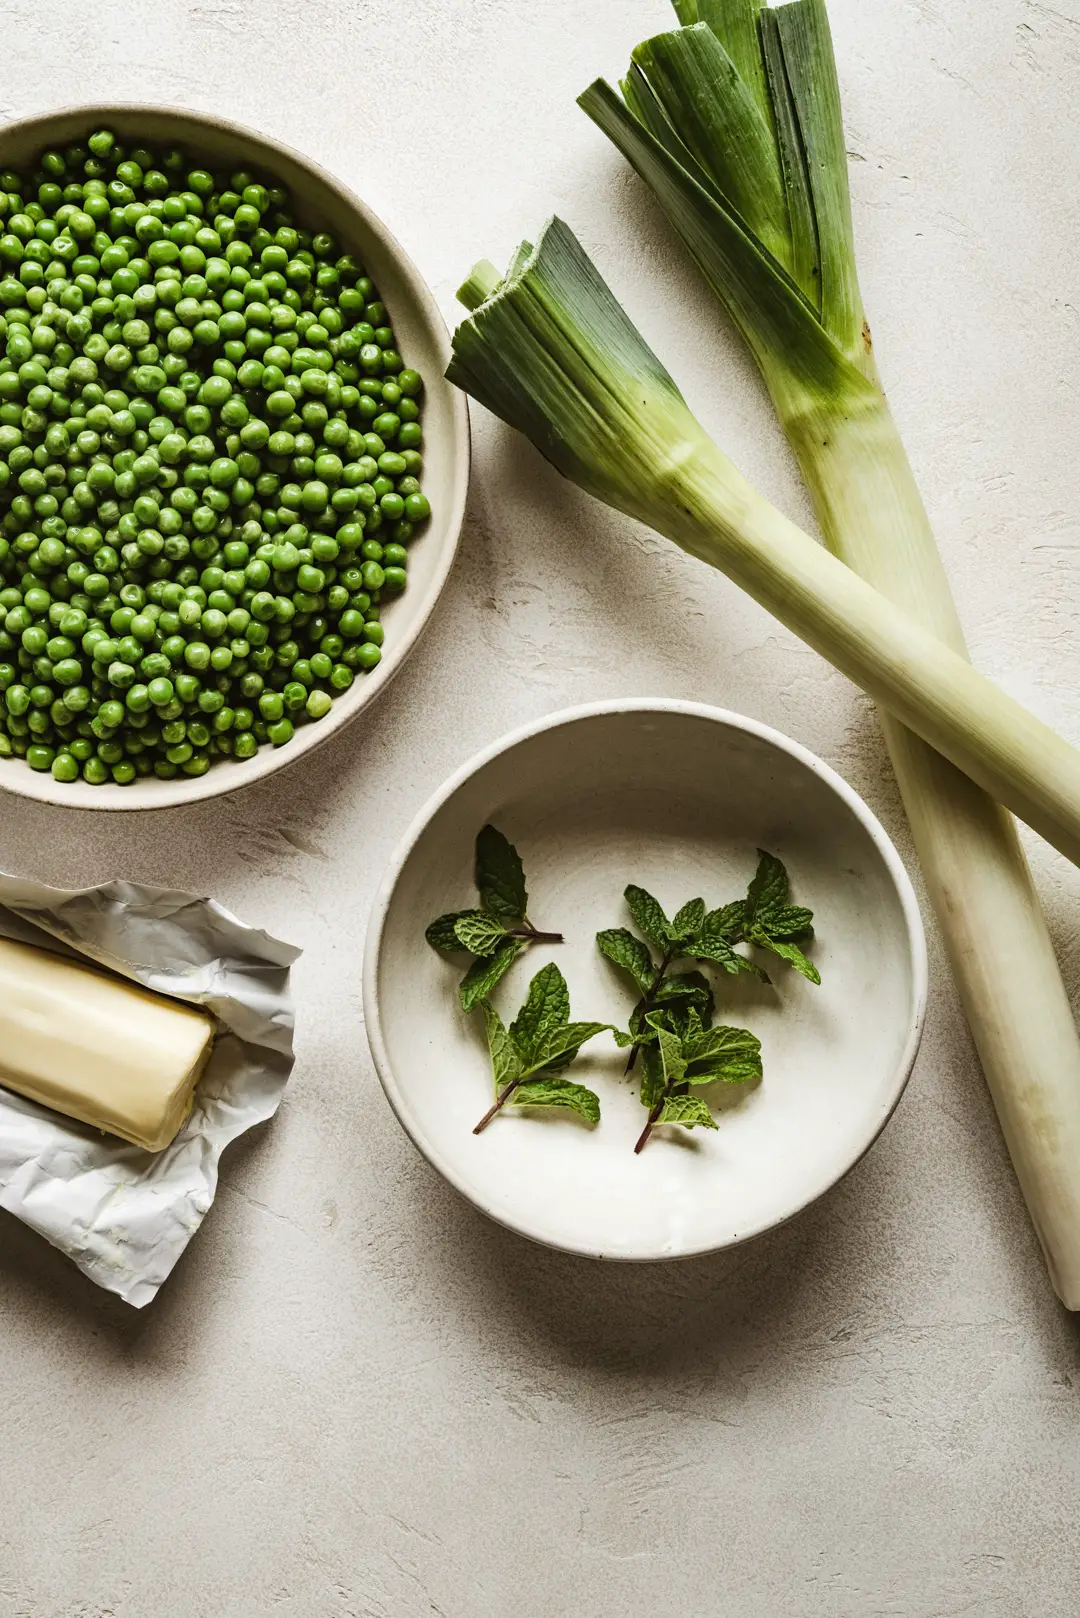 While this recipe for buttered peas with leeks and mint may be simple, it truly is the perfect way to eat peas.